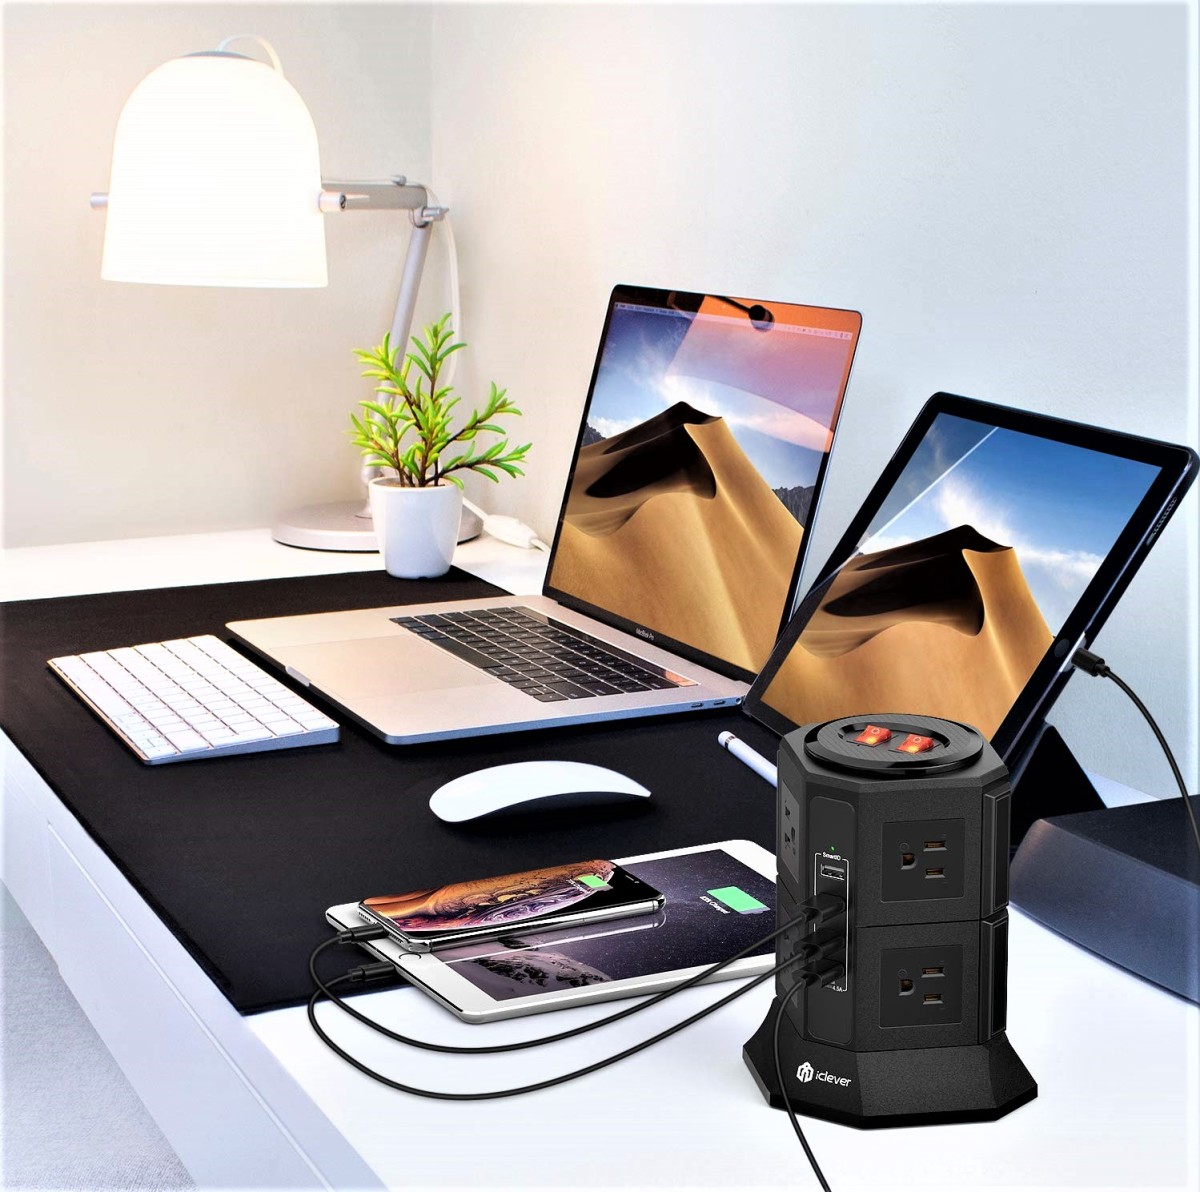 3 AC Outlets Black iClever Power Strip Surge Protector USB Charger with 3 USB